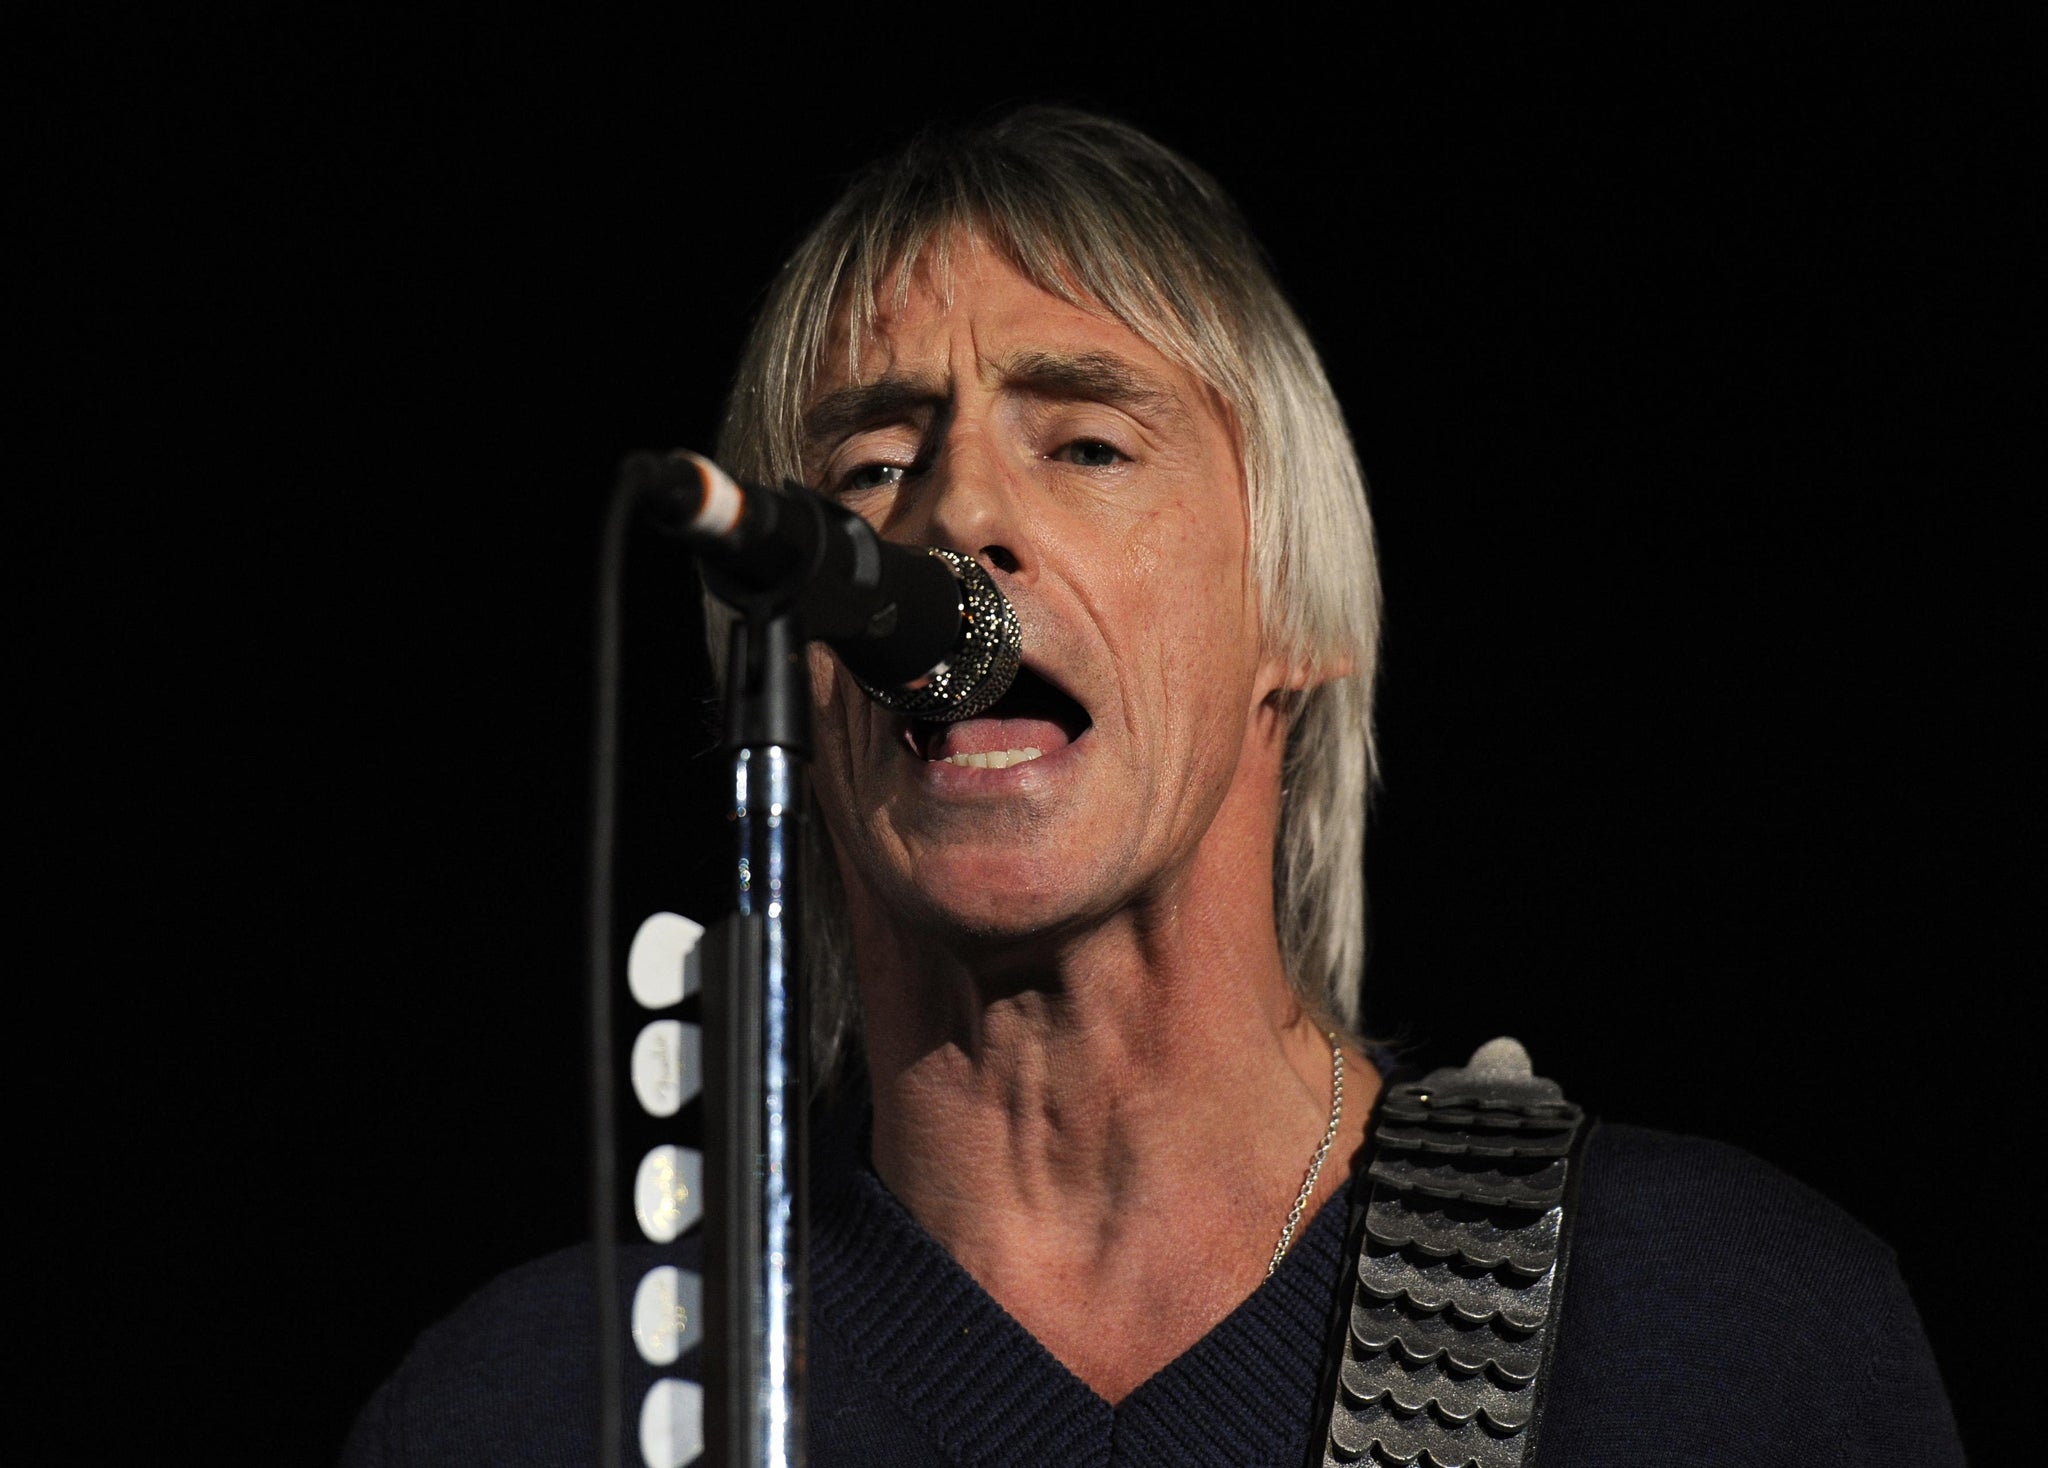 Paul Weller has been added as the latest act to appear at the Isle of Wight Festival